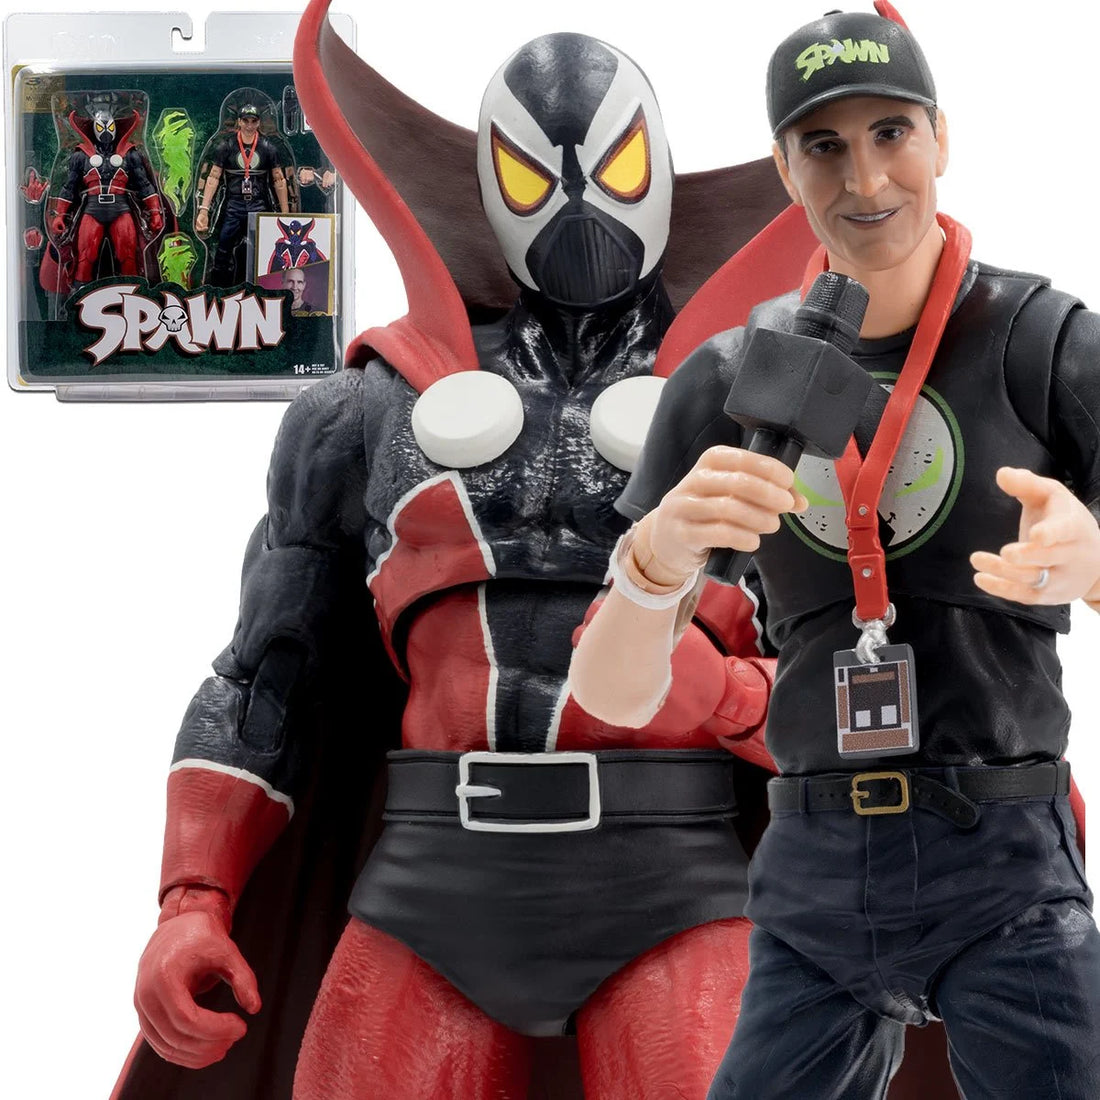 The Ultimate Collectible: Celebrating 30 Years of Spawn with This 2-Pack